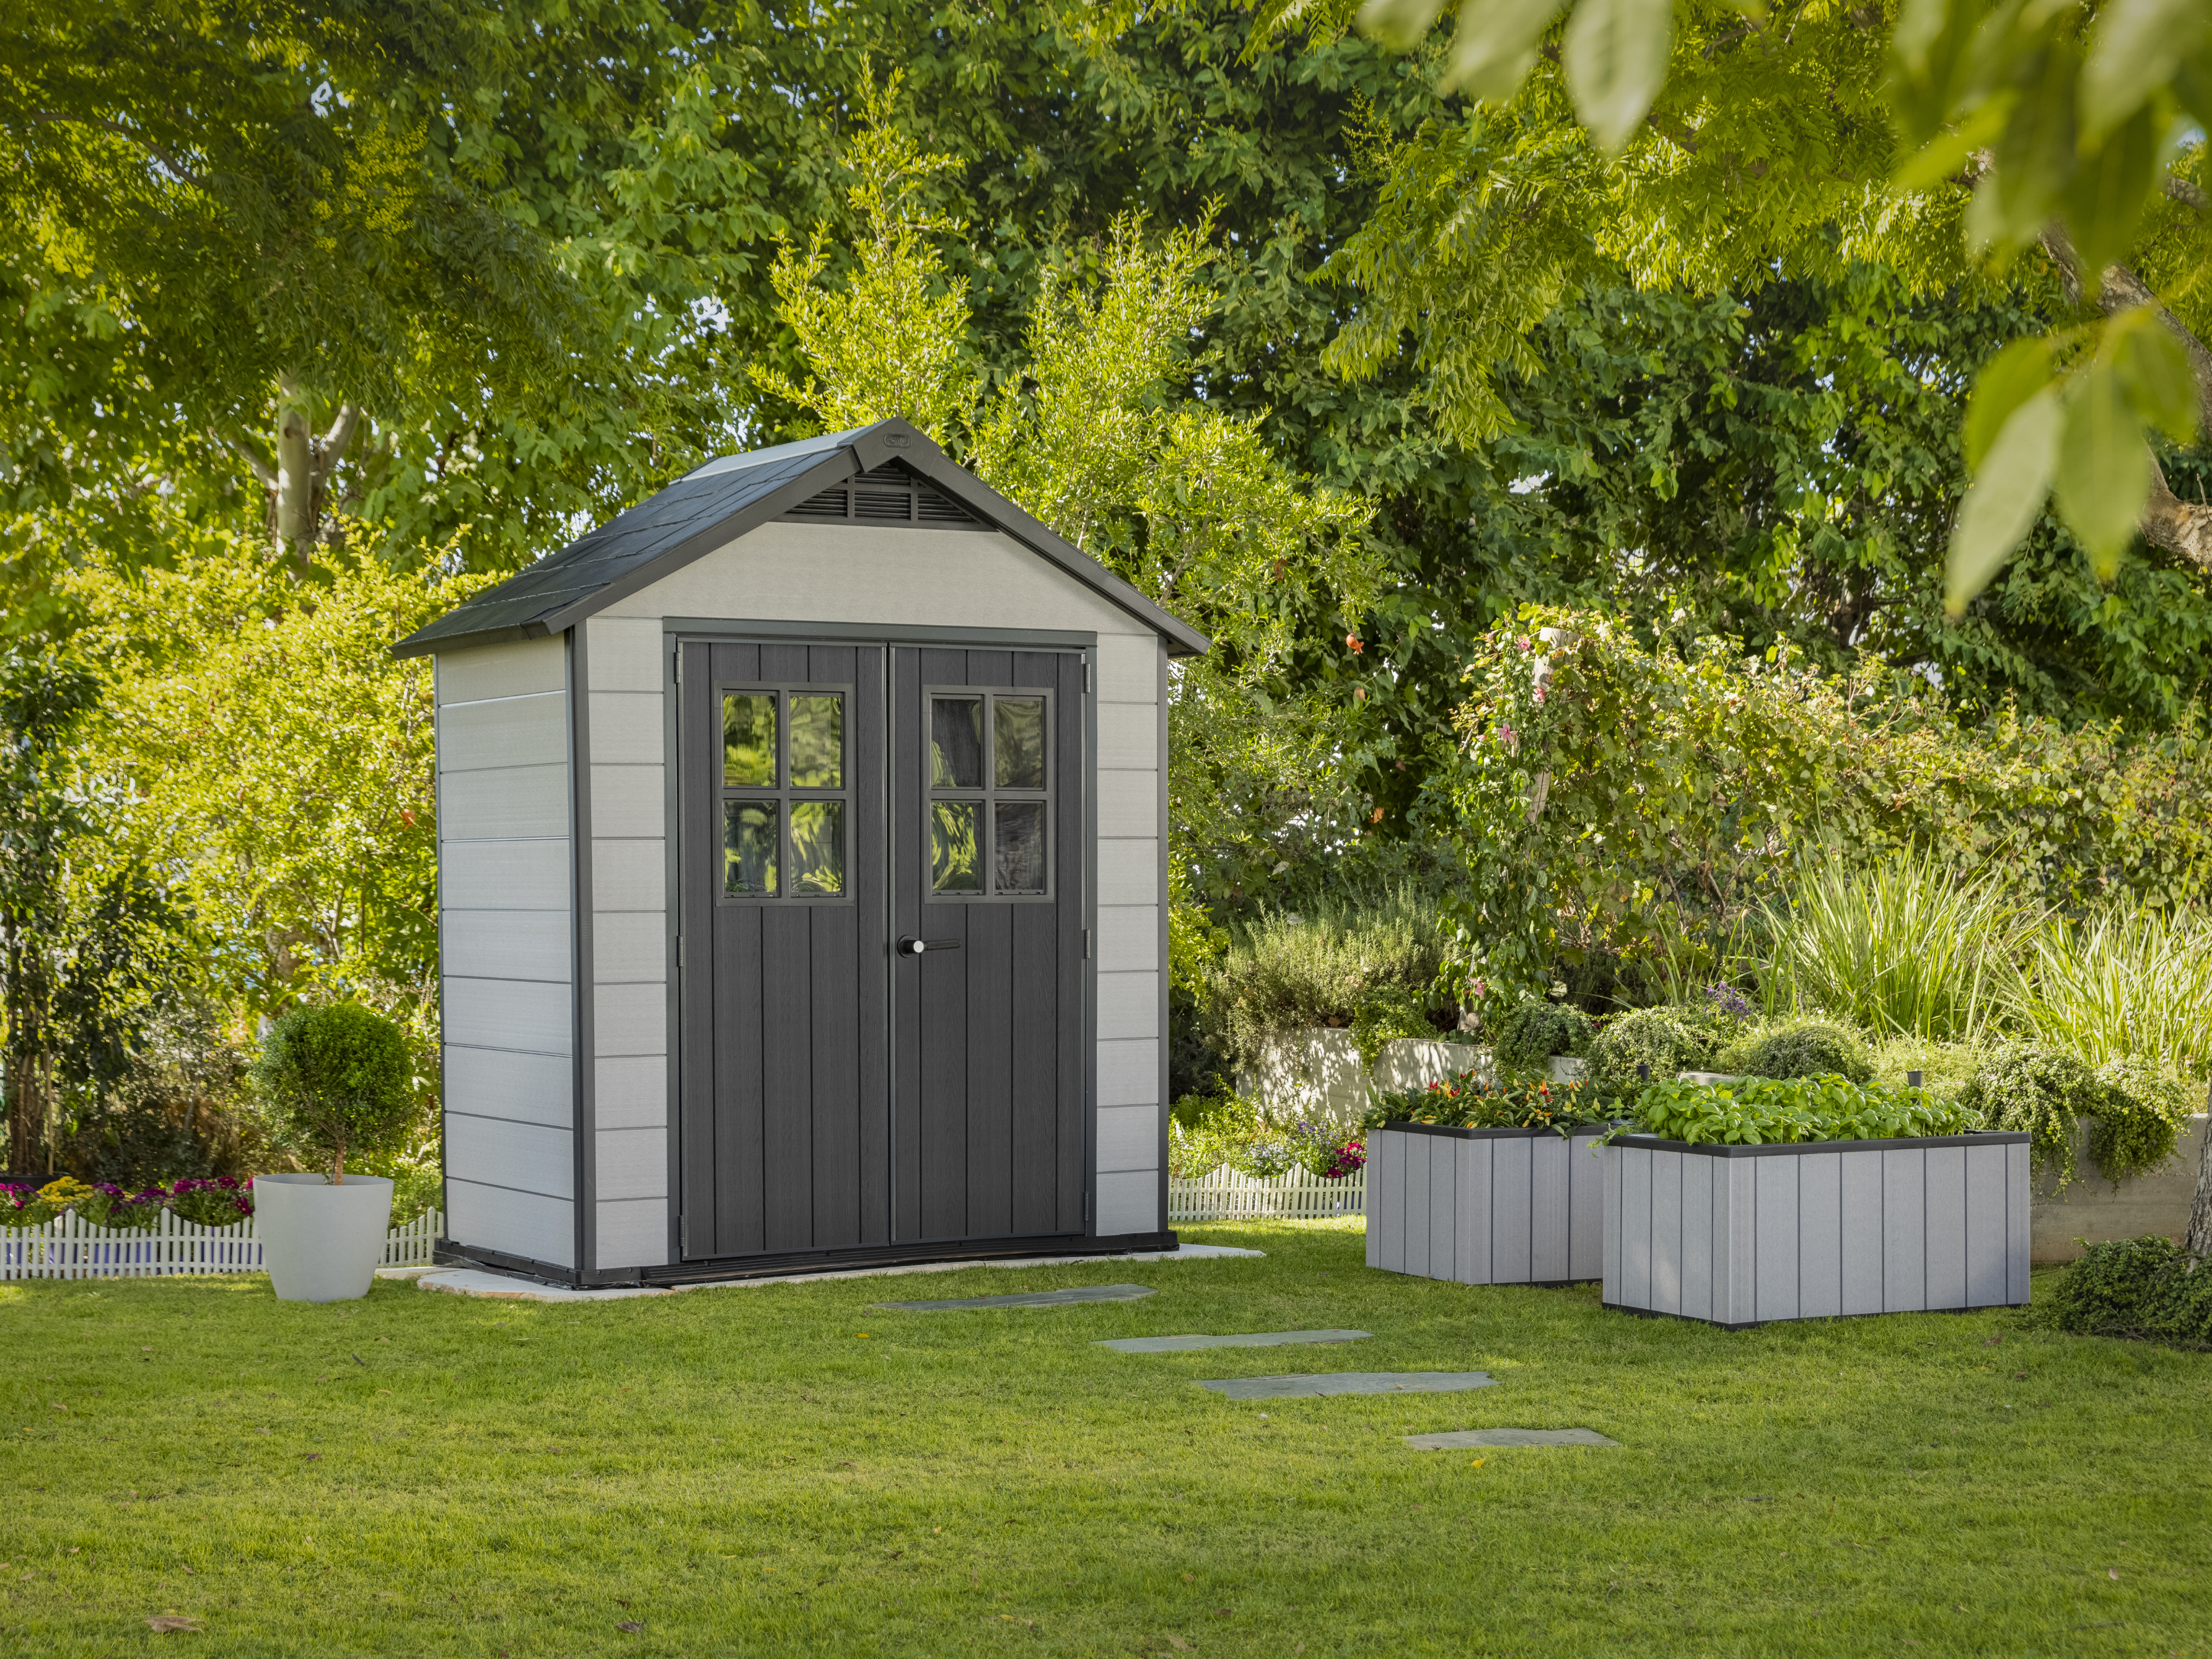 Keter Oakland 754 shed in a garden